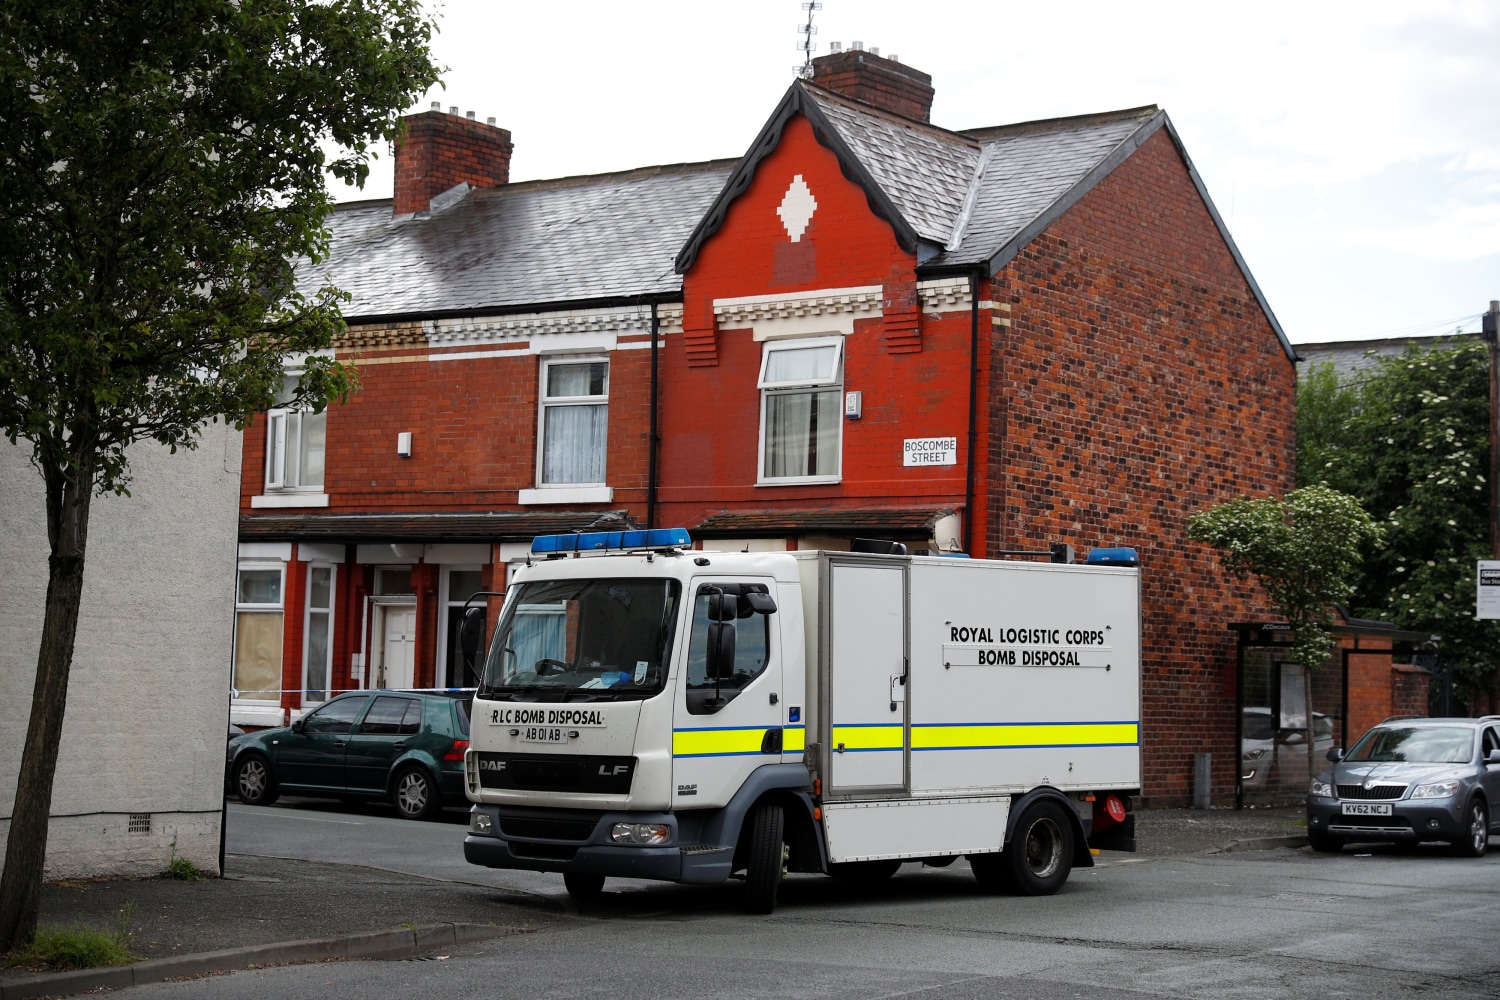 Image A bomb disposal unit stops outside a street in Moss Side Manchester